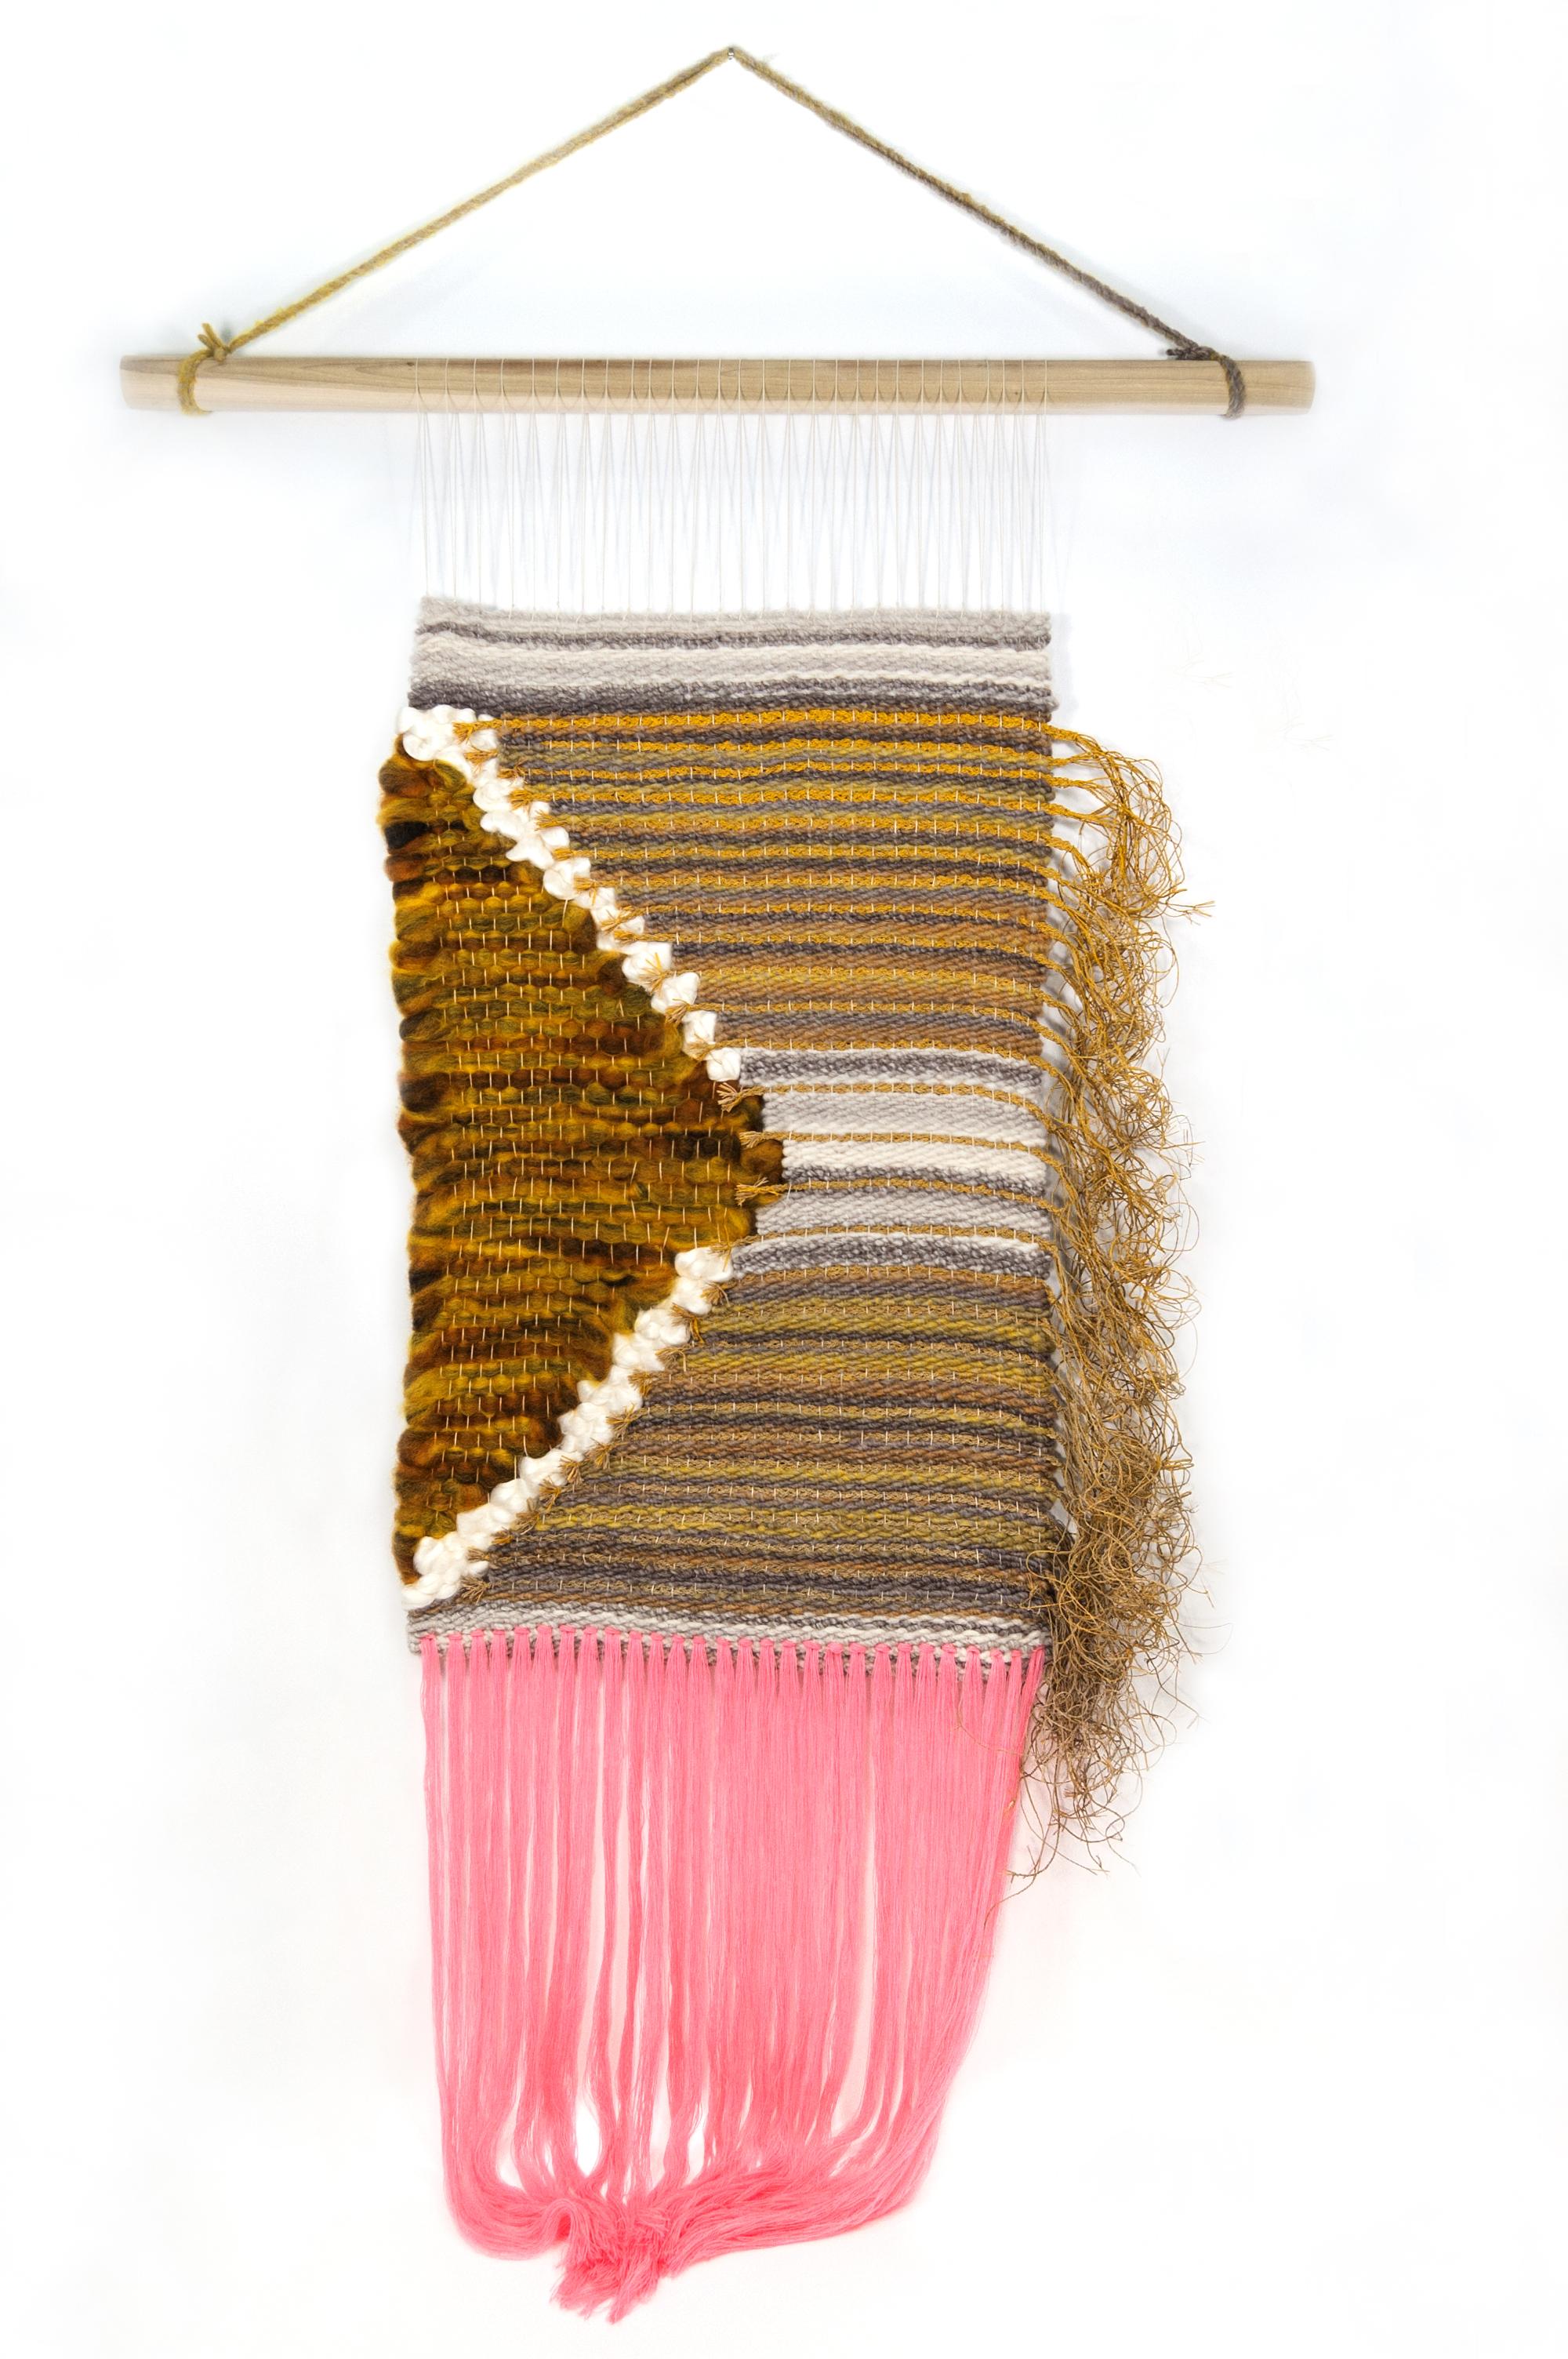 Unconditional- Mixed Media, Cotton, Thread, Woven Wall Hanging, Sculpture, Pink - Mixed Media Art by Pam Marlene Taylor